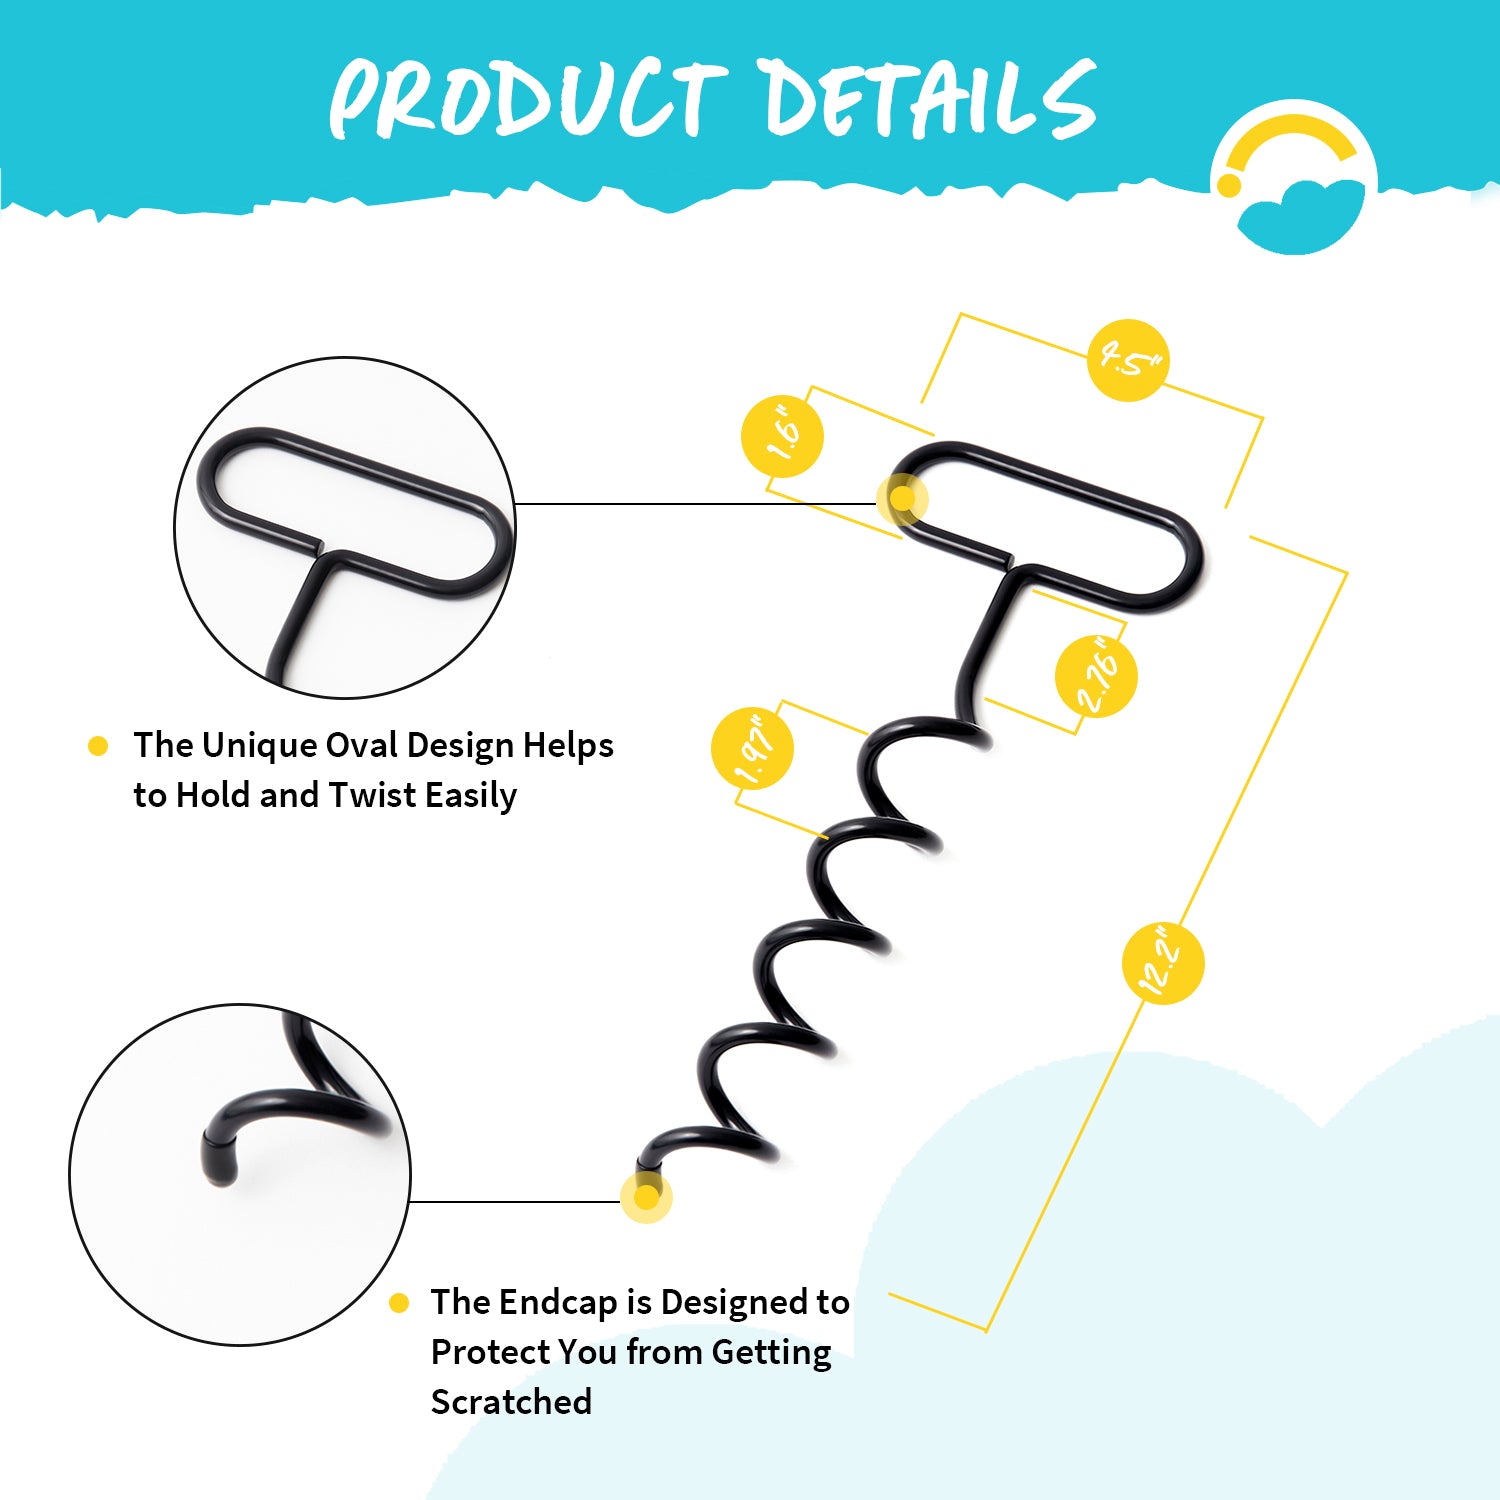 Product Details: The Unique Oval Design Helps to Hold and Twist Easily.  The Endcap is Designed to Protect You from Getting Scratched.  Height 12.2", Width of Handle Bar 4.5", Height of Handle 1.6", Height between Handle Bar and first spiral.  1.97" between spirals.  